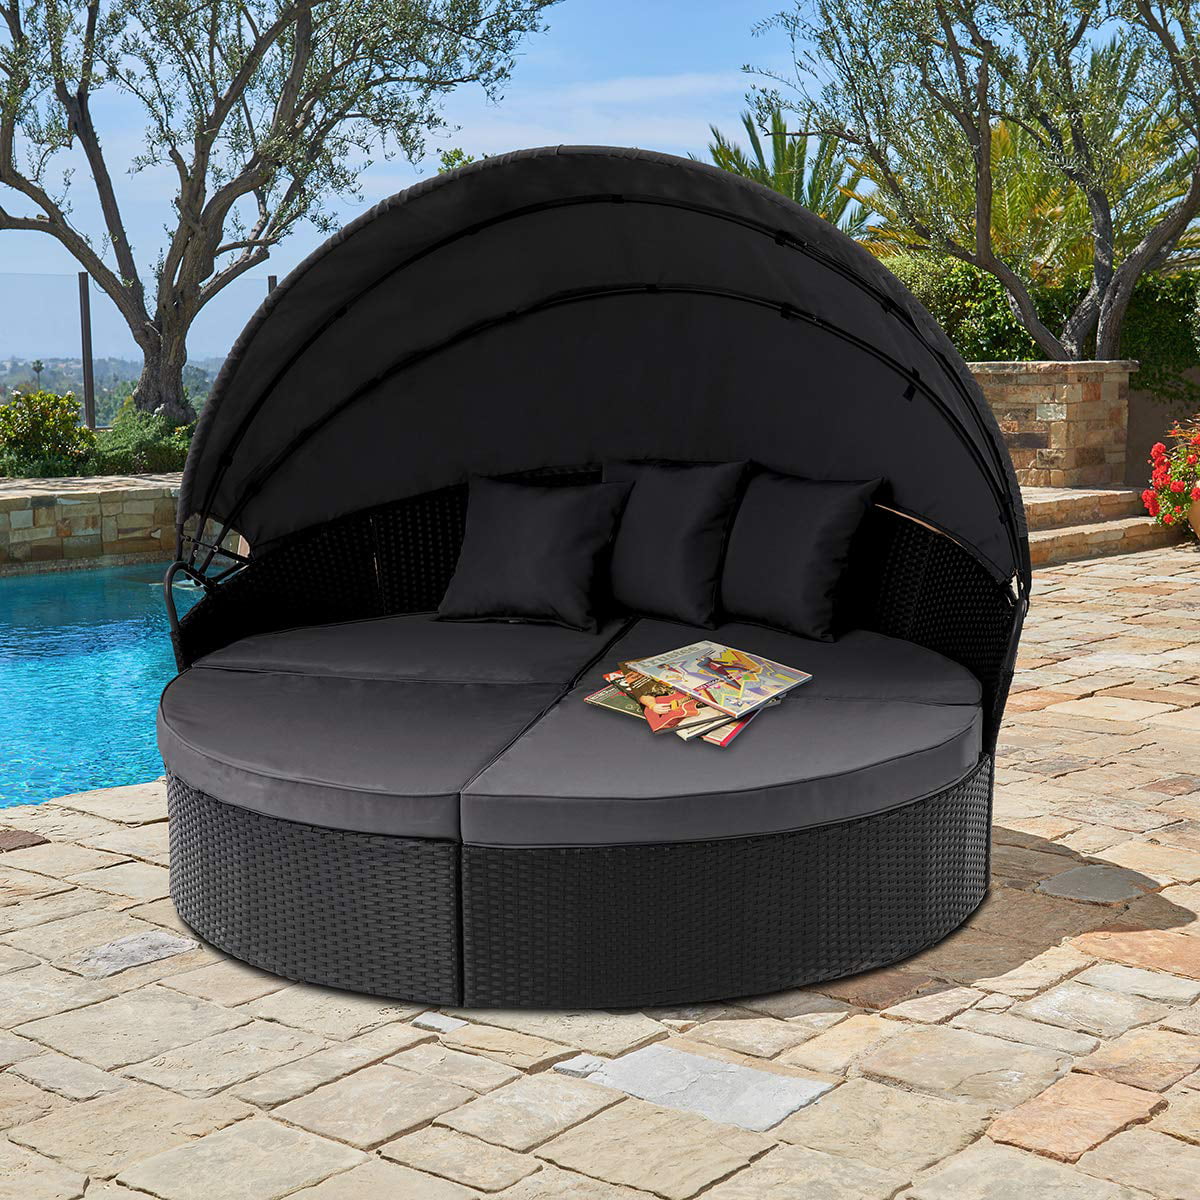 Cozy patio furniture on luxury outdoor patio. Overview of upscale patio  set, dark wicker luxury furniture with comfortable 